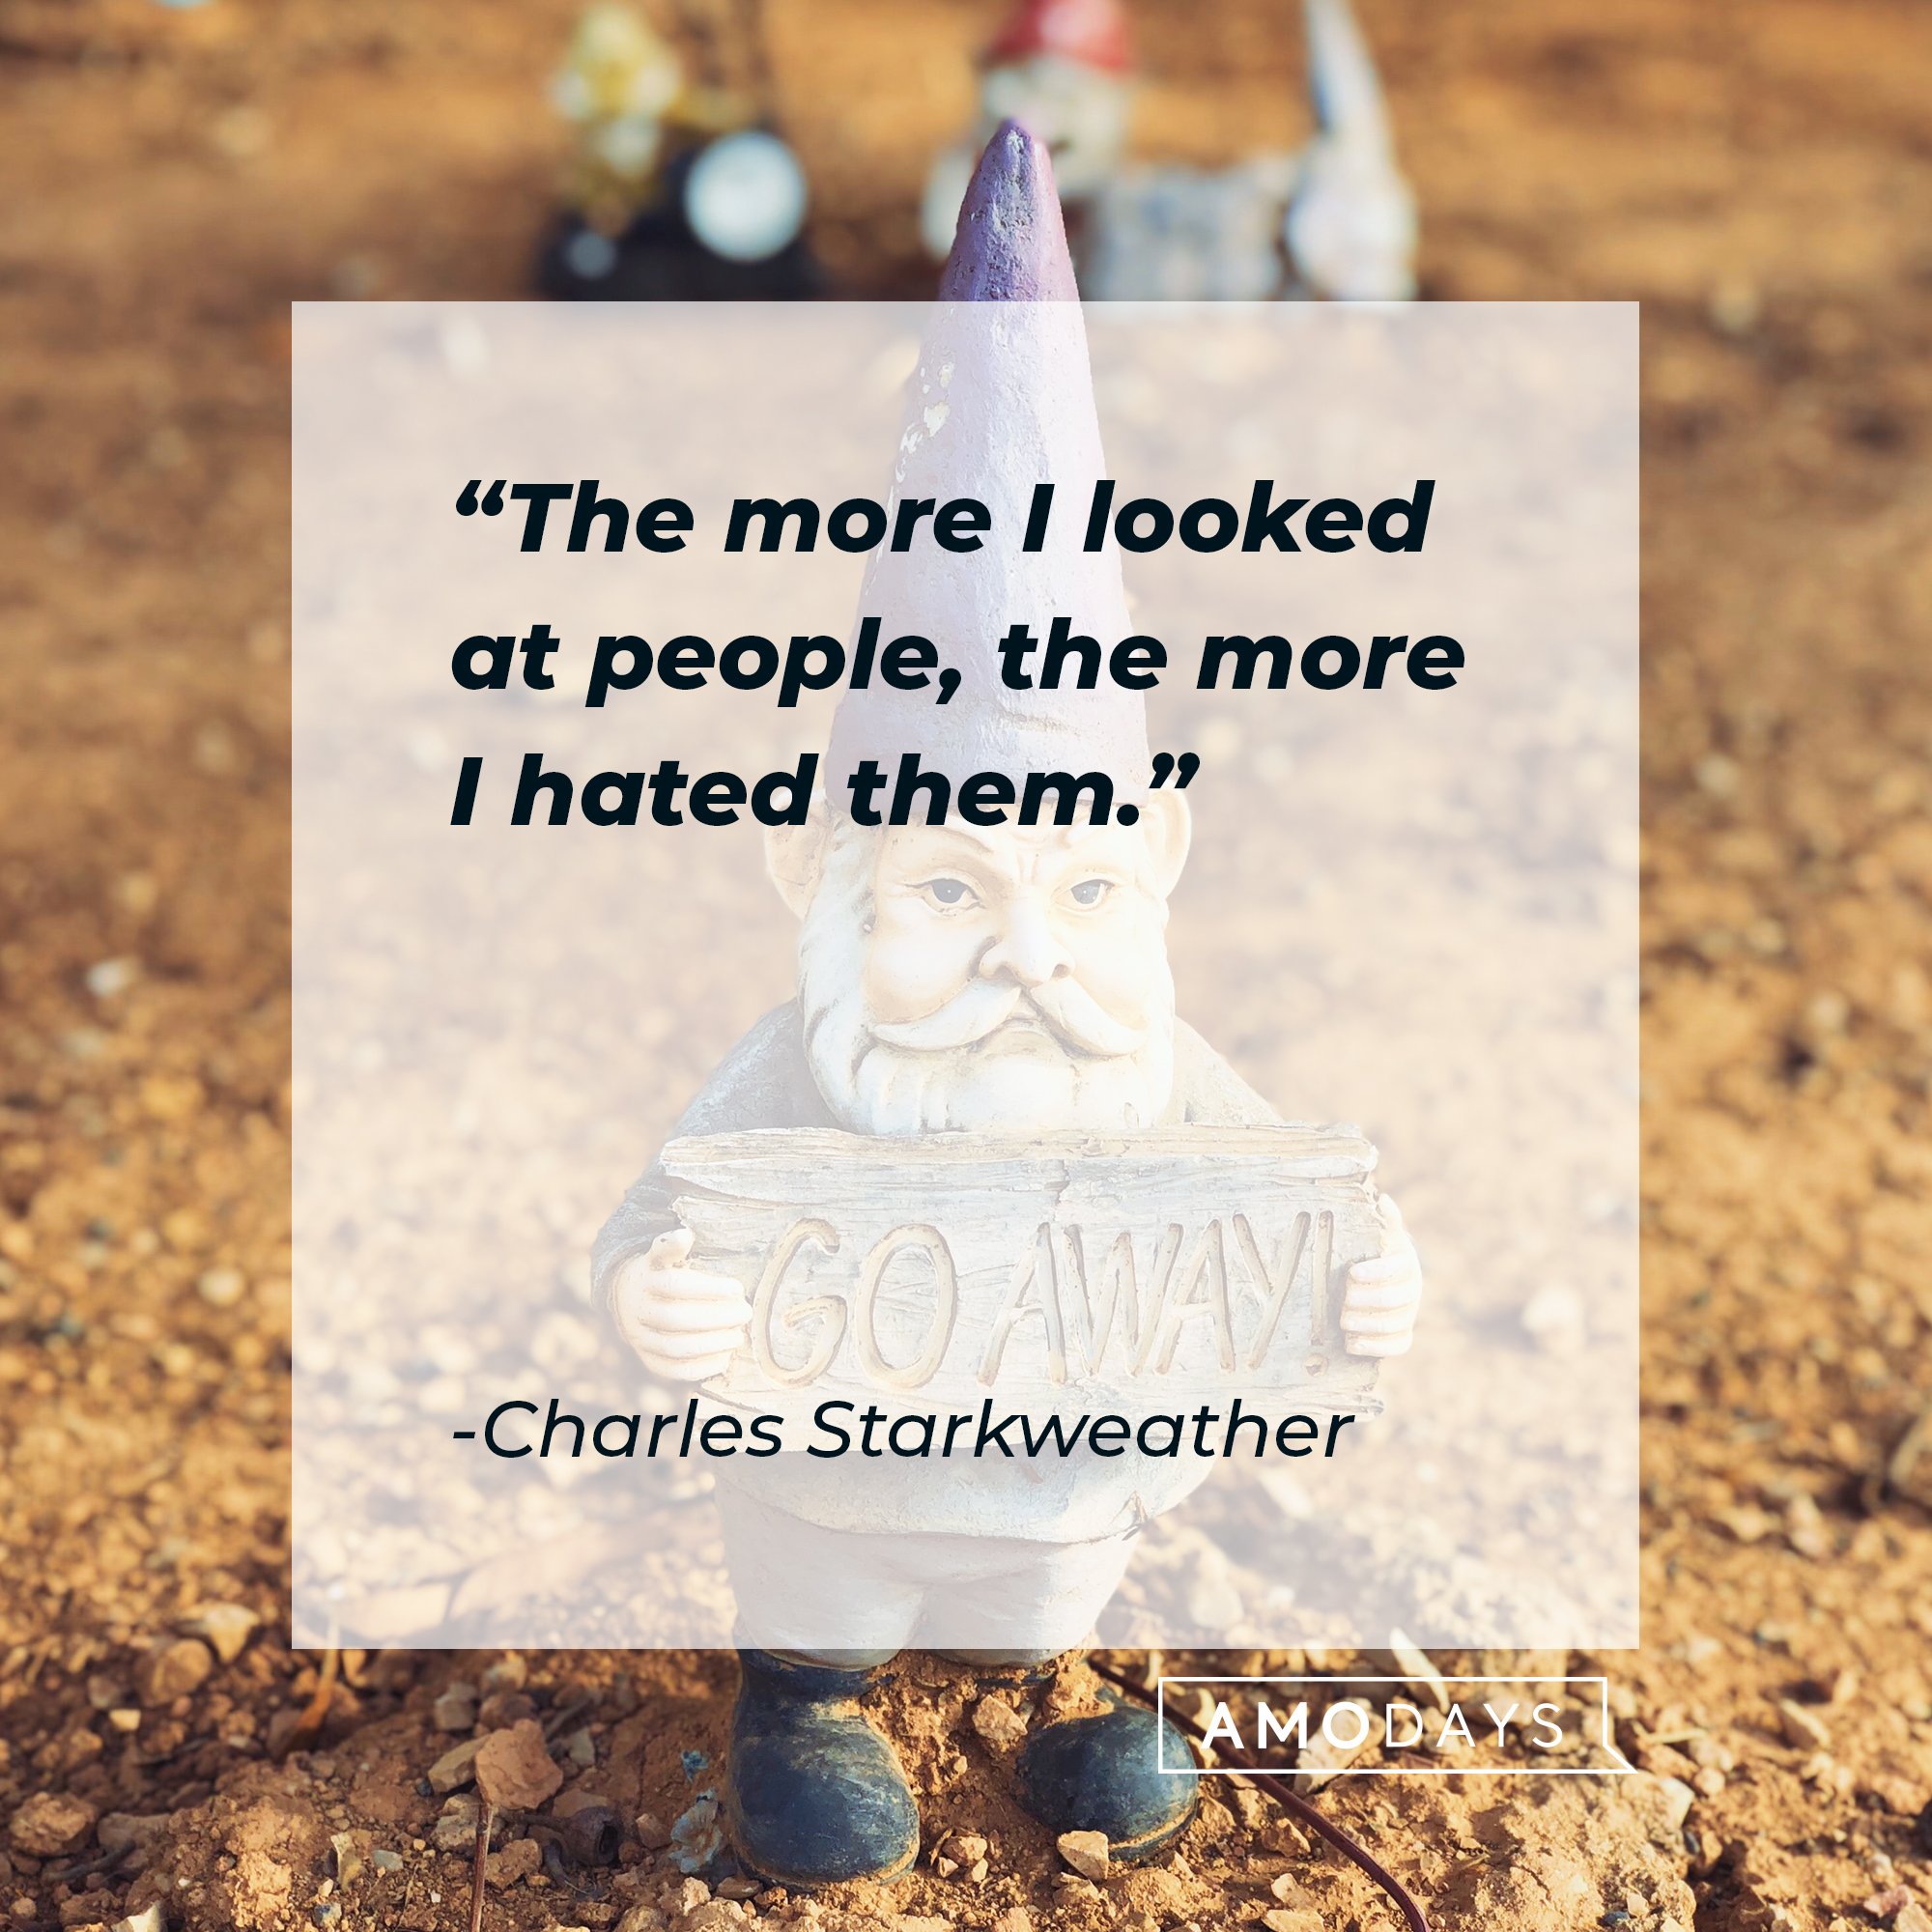 Charles Starkweather’s quote: "The more I looked at people, the more I hated them." | Image: AmoDays 